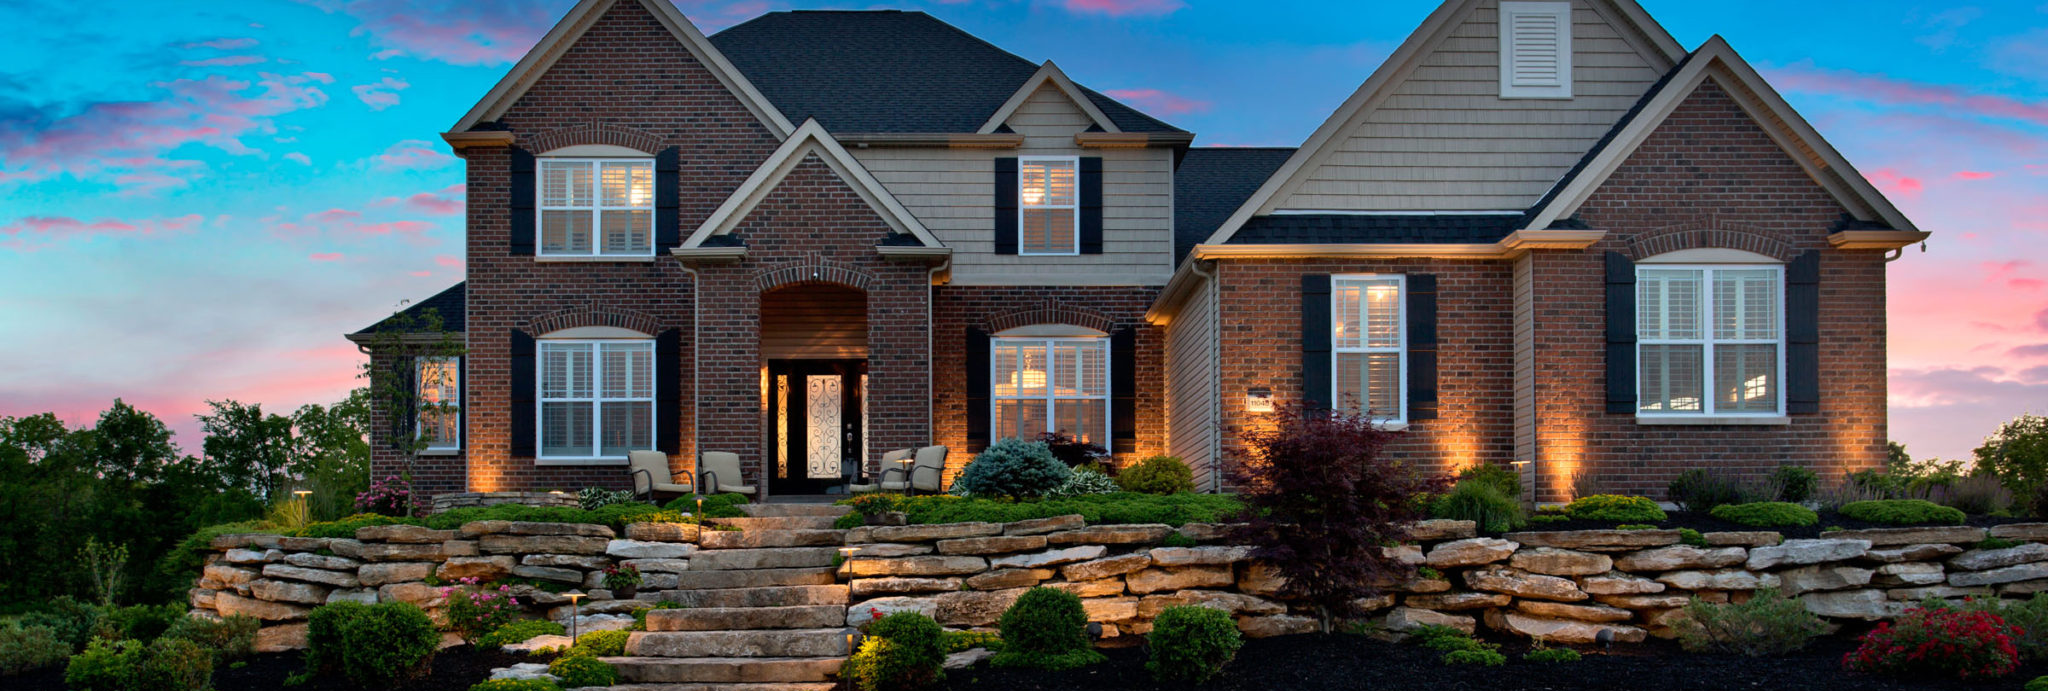 Trying to Sell Your Home? Add Curb Appeal & Value with Outdoor Lighting